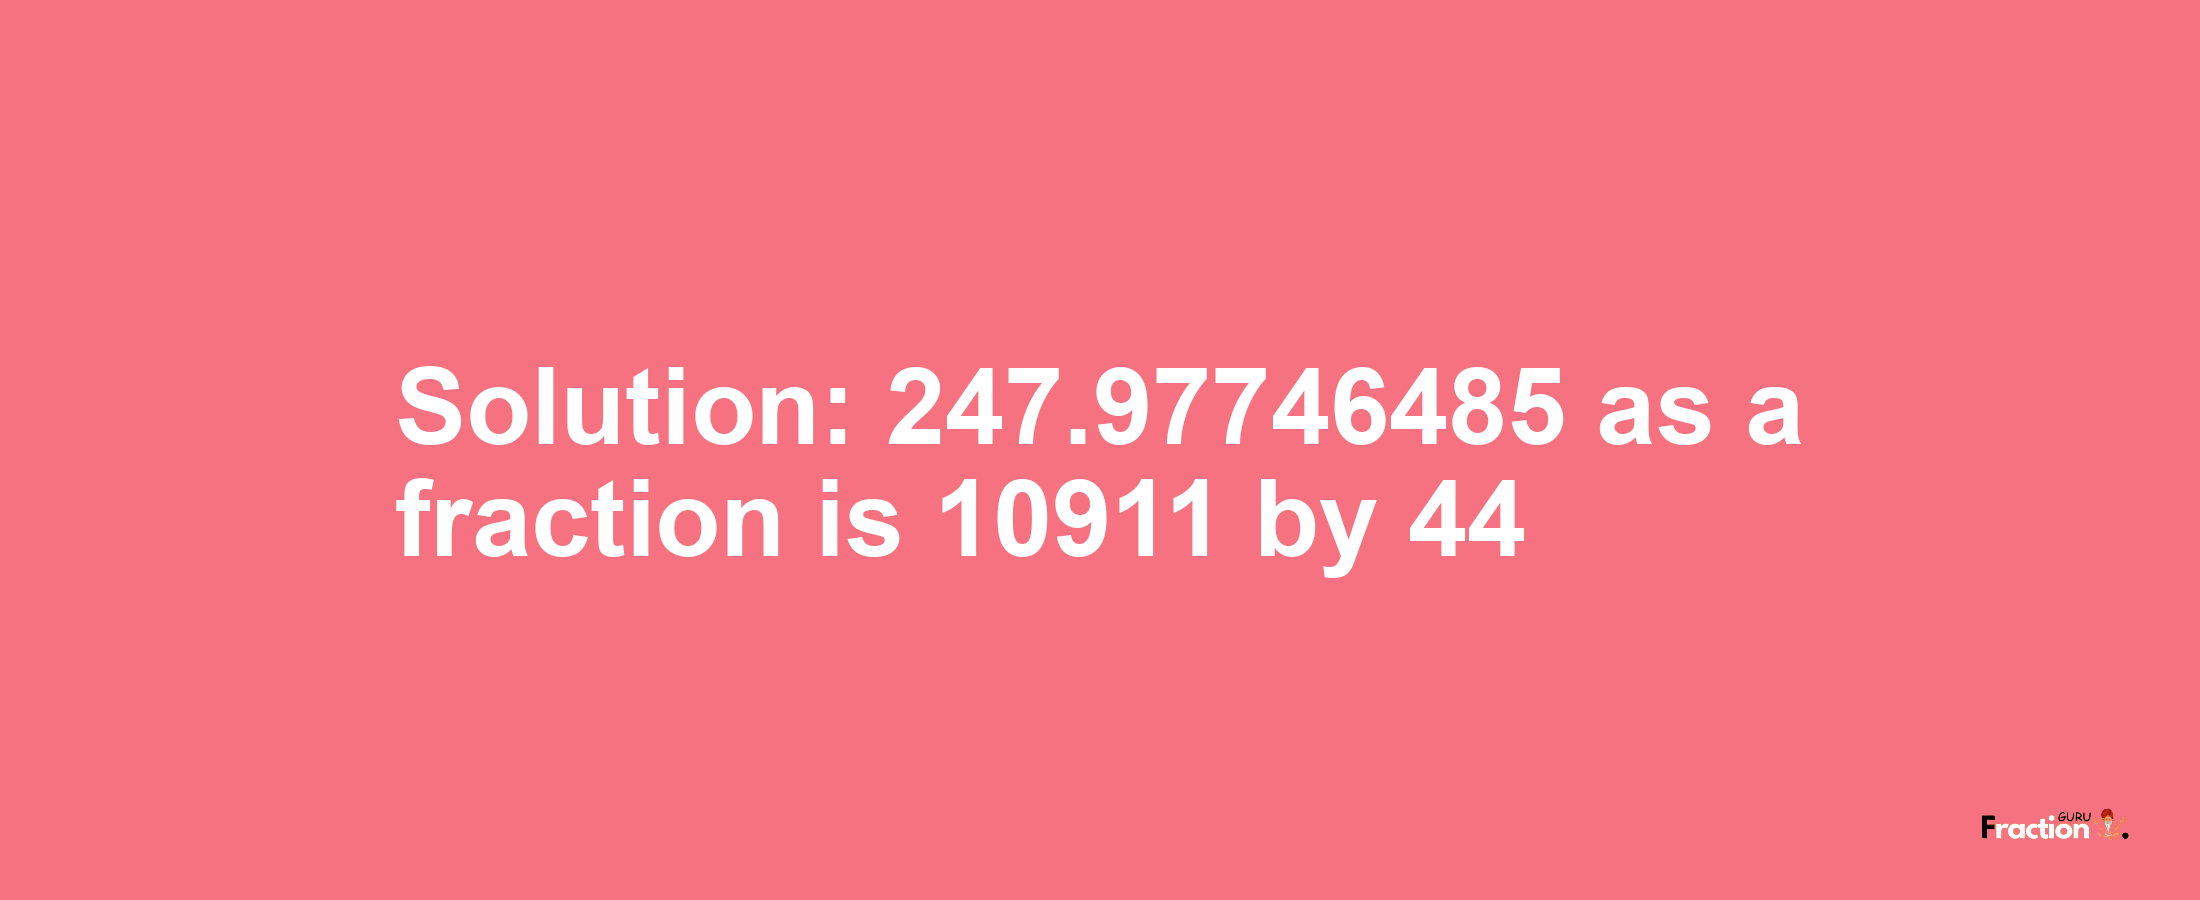 Solution:247.97746485 as a fraction is 10911/44